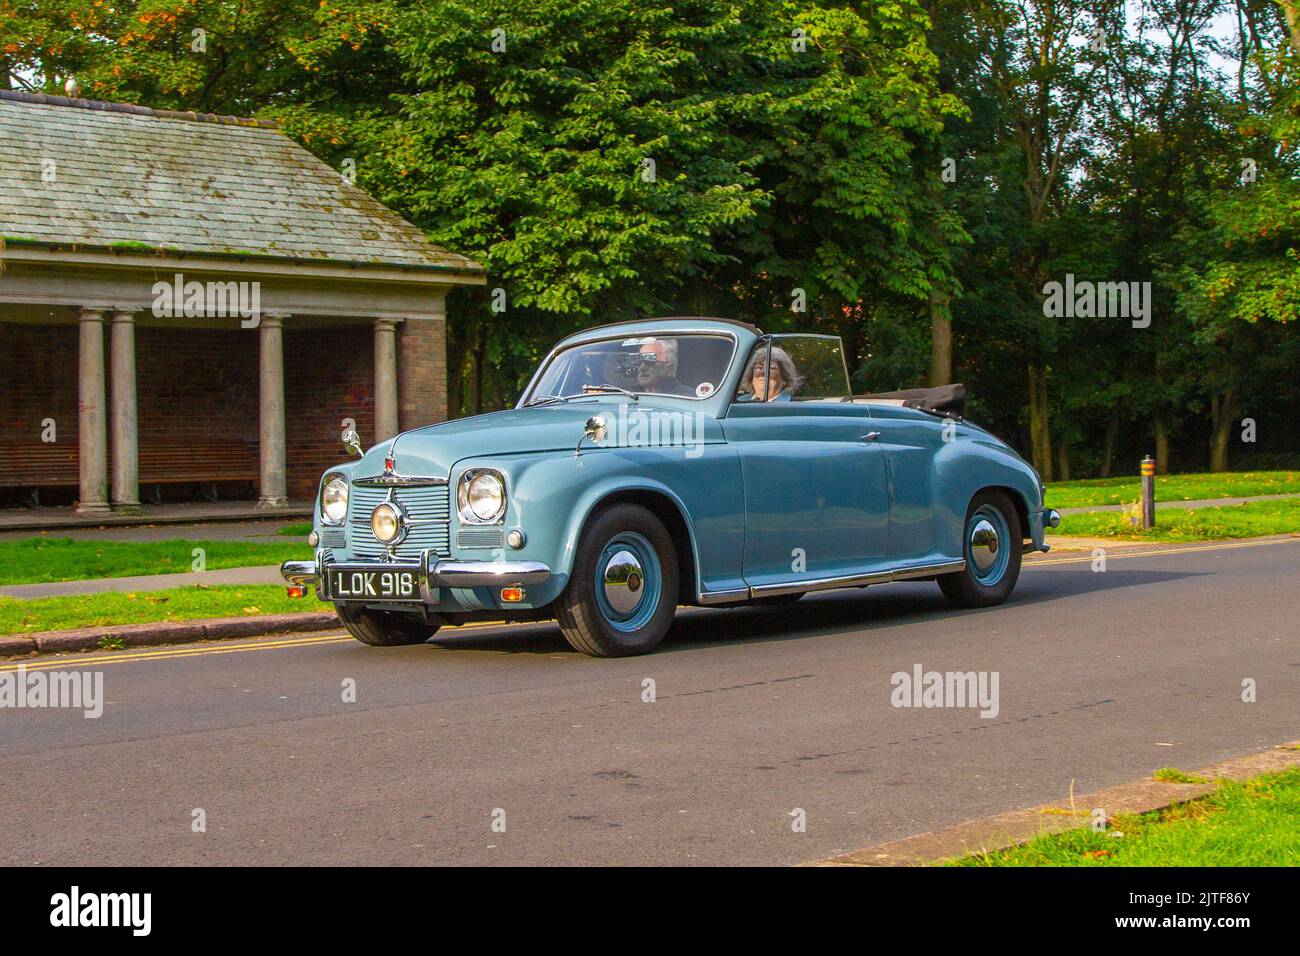 1951 50s fifties Blue  ROVER P4 2638cc Petrol Cabrio; Cars arriving at the annual Stanley Park Classic Car Show. Stanley Park classics yesteryear Motor Show is hosted by Blackpool Vintage Vehicle Preservation Group, UK. Stock Photo